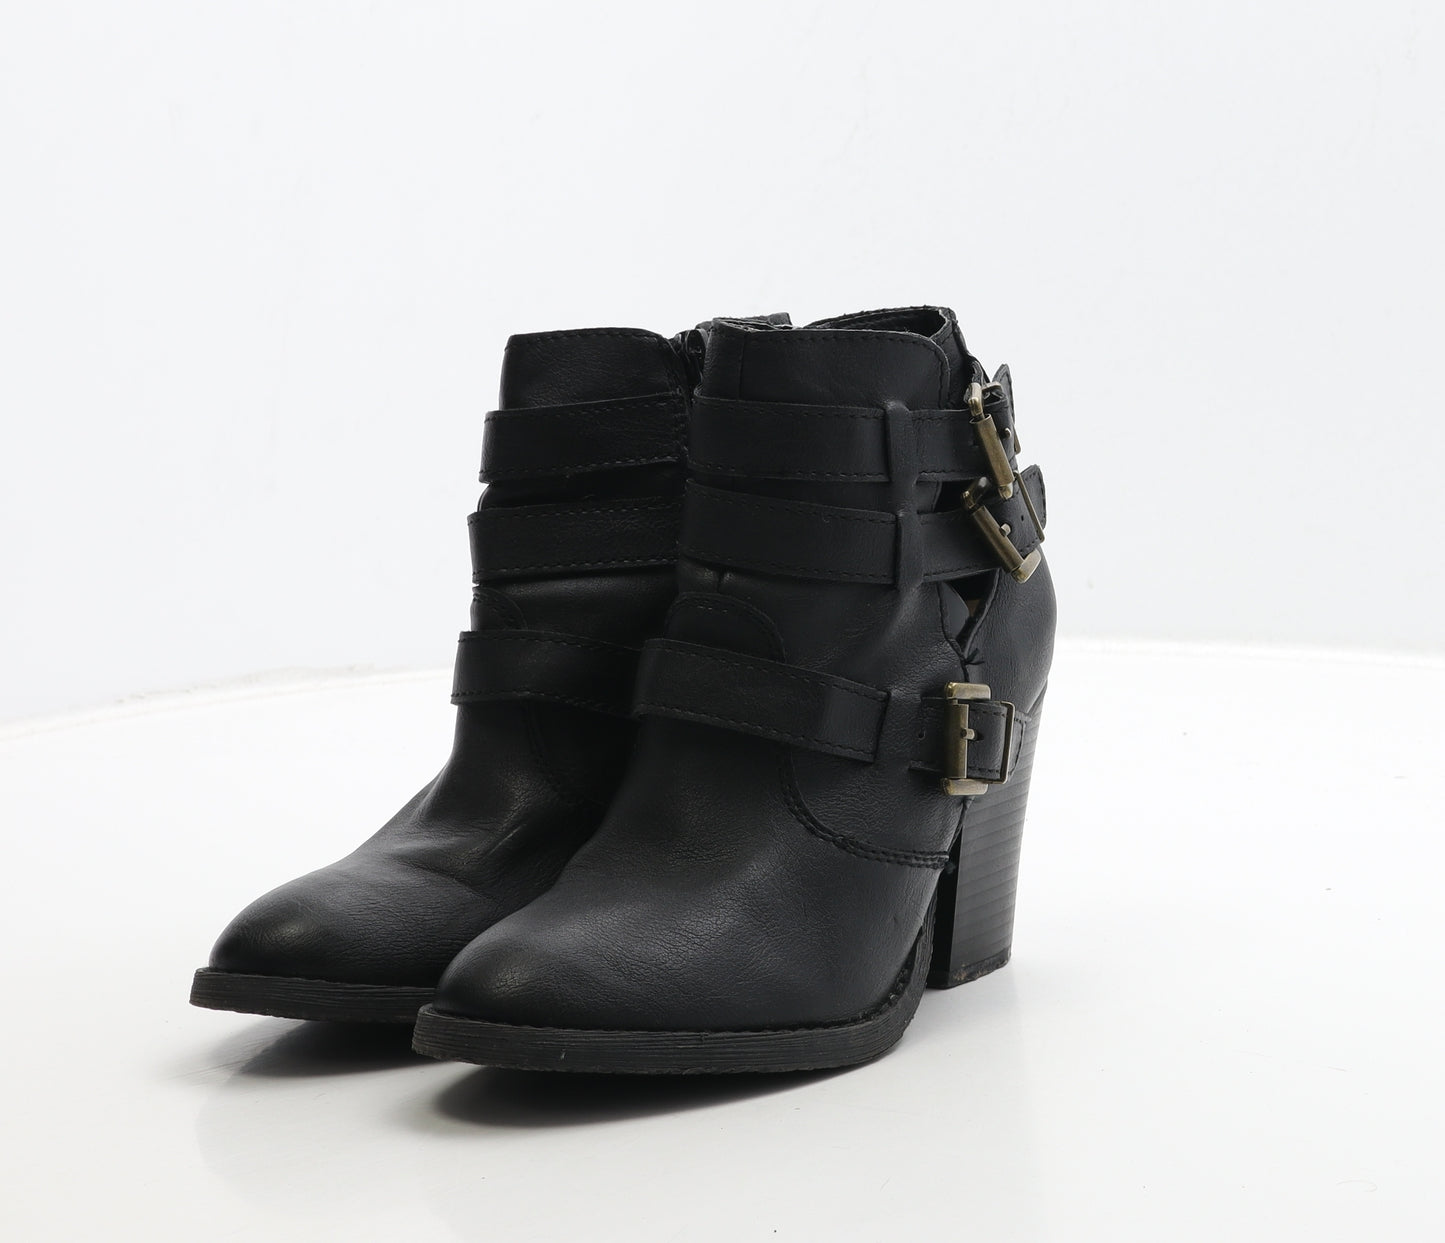 JustFab Womens Black Leather Bootie Boot UK 4.5 37.5